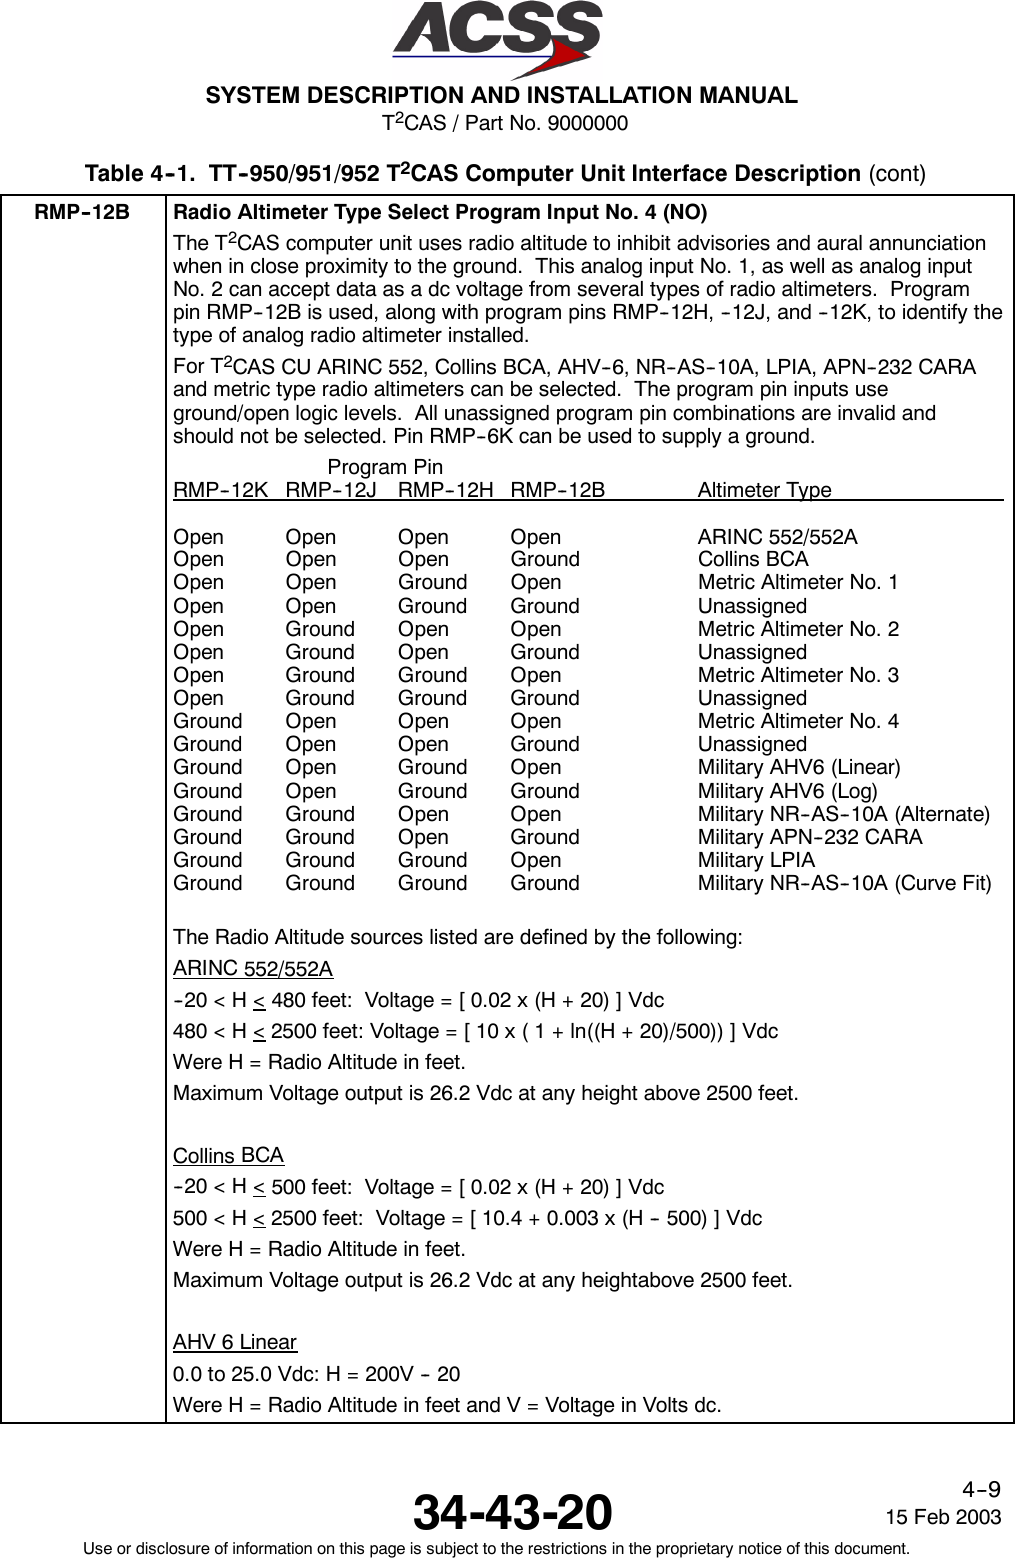 T2CAS / Part No. 9000000SYSTEM DESCRIPTION AND INSTALLATION MANUAL34-43-20 15 Feb 2003Use or disclosure of information on this page is subject to the restrictions in the proprietary notice of this document.4--9Table 4--1. TT--950/951/952 T2CAS Computer Unit Interface Description (cont)RMP--12B Radio Altimeter Type Select Program Input No. 4 (NO)The T2CAS computer unit uses radio altitude to inhibit advisories and aural annunciationwhen in close proximity to the ground. This analog input No. 1, as well as analog inputNo. 2 can accept data as a dc voltage from several types of radio altimeters. Programpin RMP--12B is used, along with program pins RMP--12H, --12J, and --12K, to identify thetype of analog radio altimeter installed.For T2CAS CU ARINC 552, Collins BCA, AHV--6, NR--AS--10A, LPIA, APN--232 CARAand metric type radio altimeters can be selected. The program pin inputs useground/open logic levels. All unassigned program pin combinations are invalid andshould not be selected. Pin RMP--6K can be used to supply a ground.Program PinRMP--12K RMP--12J RMP--12H RMP--12B Altimeter TypeOpen Open Open Open ARINC 552/552AOpen Open Open Ground Collins BCAOpen Open Ground Open Metric Altimeter No. 1Open Open Ground Ground UnassignedOpen Ground Open Open Metric Altimeter No. 2Open Ground Open Ground UnassignedOpen Ground Ground Open Metric Altimeter No. 3Open Ground Ground Ground UnassignedGround Open Open Open Metric Altimeter No. 4Ground Open Open Ground UnassignedGround Open Ground Open Military AHV6 (Linear)Ground Open Ground Ground Military AHV6 (Log)Ground Ground Open Open Military NR--AS--10A (Alternate)Ground Ground Open Ground Military APN--232 CARAGround Ground Ground Open Military LPIAGround Ground Ground Ground Military NR--AS--10A (Curve Fit)The Radio Altitude sources listed are defined by the following:ARINC 552/552A-- 2 0 &lt; H &lt; 480 feet: Voltage = [ 0.02 x (H + 20) ] Vdc480 &lt; H &lt; 2500 feet: Voltage = [ 10 x ( 1 + ln((H + 20)/500)) ] VdcWere H = Radio Altitude in feet.Maximum Voltage output is 26.2 Vdc at any height above 2500 feet.Collins BCA-- 2 0 &lt; H &lt; 500 feet: Voltage = [ 0.02 x (H + 20) ] Vdc500 &lt; H &lt; 2500 feet: Voltage = [ 10.4 + 0.003 x (H -- 500) ] VdcWere H = Radio Altitude in feet.Maximum Voltage output is 26.2 Vdc at any heightabove 2500 feet.AHV 6 Linear0.0 to 25.0 Vdc: H = 200V -- 20Were H = Radio Altitude in feet and V = Voltage in Volts dc.